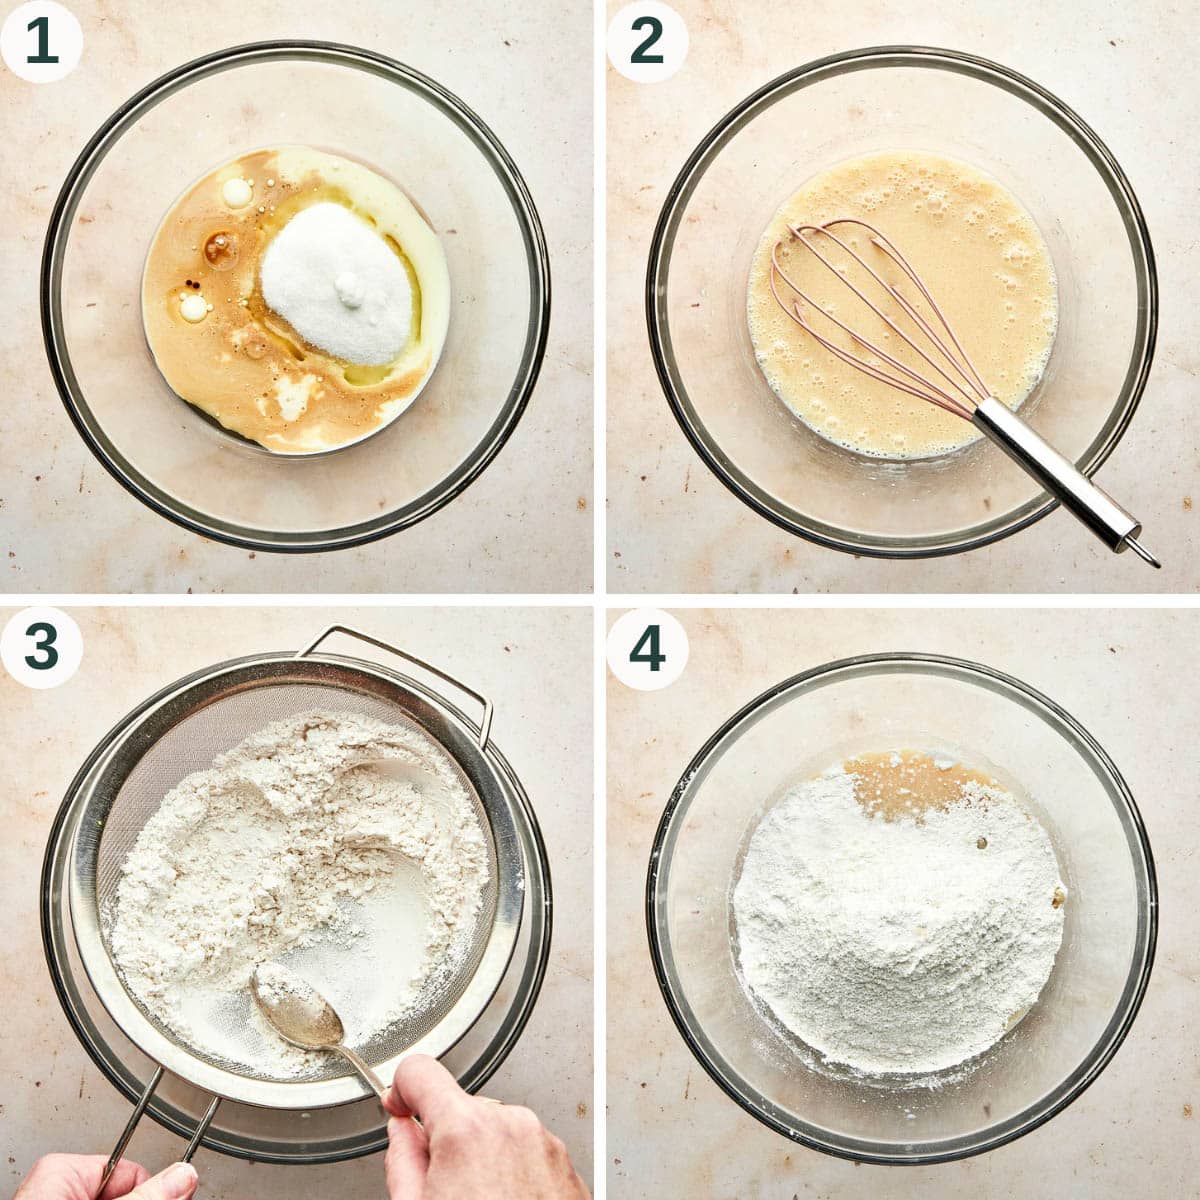 Vanilla cake steps 1 to 4, mixing wet ingredients and adding dry.